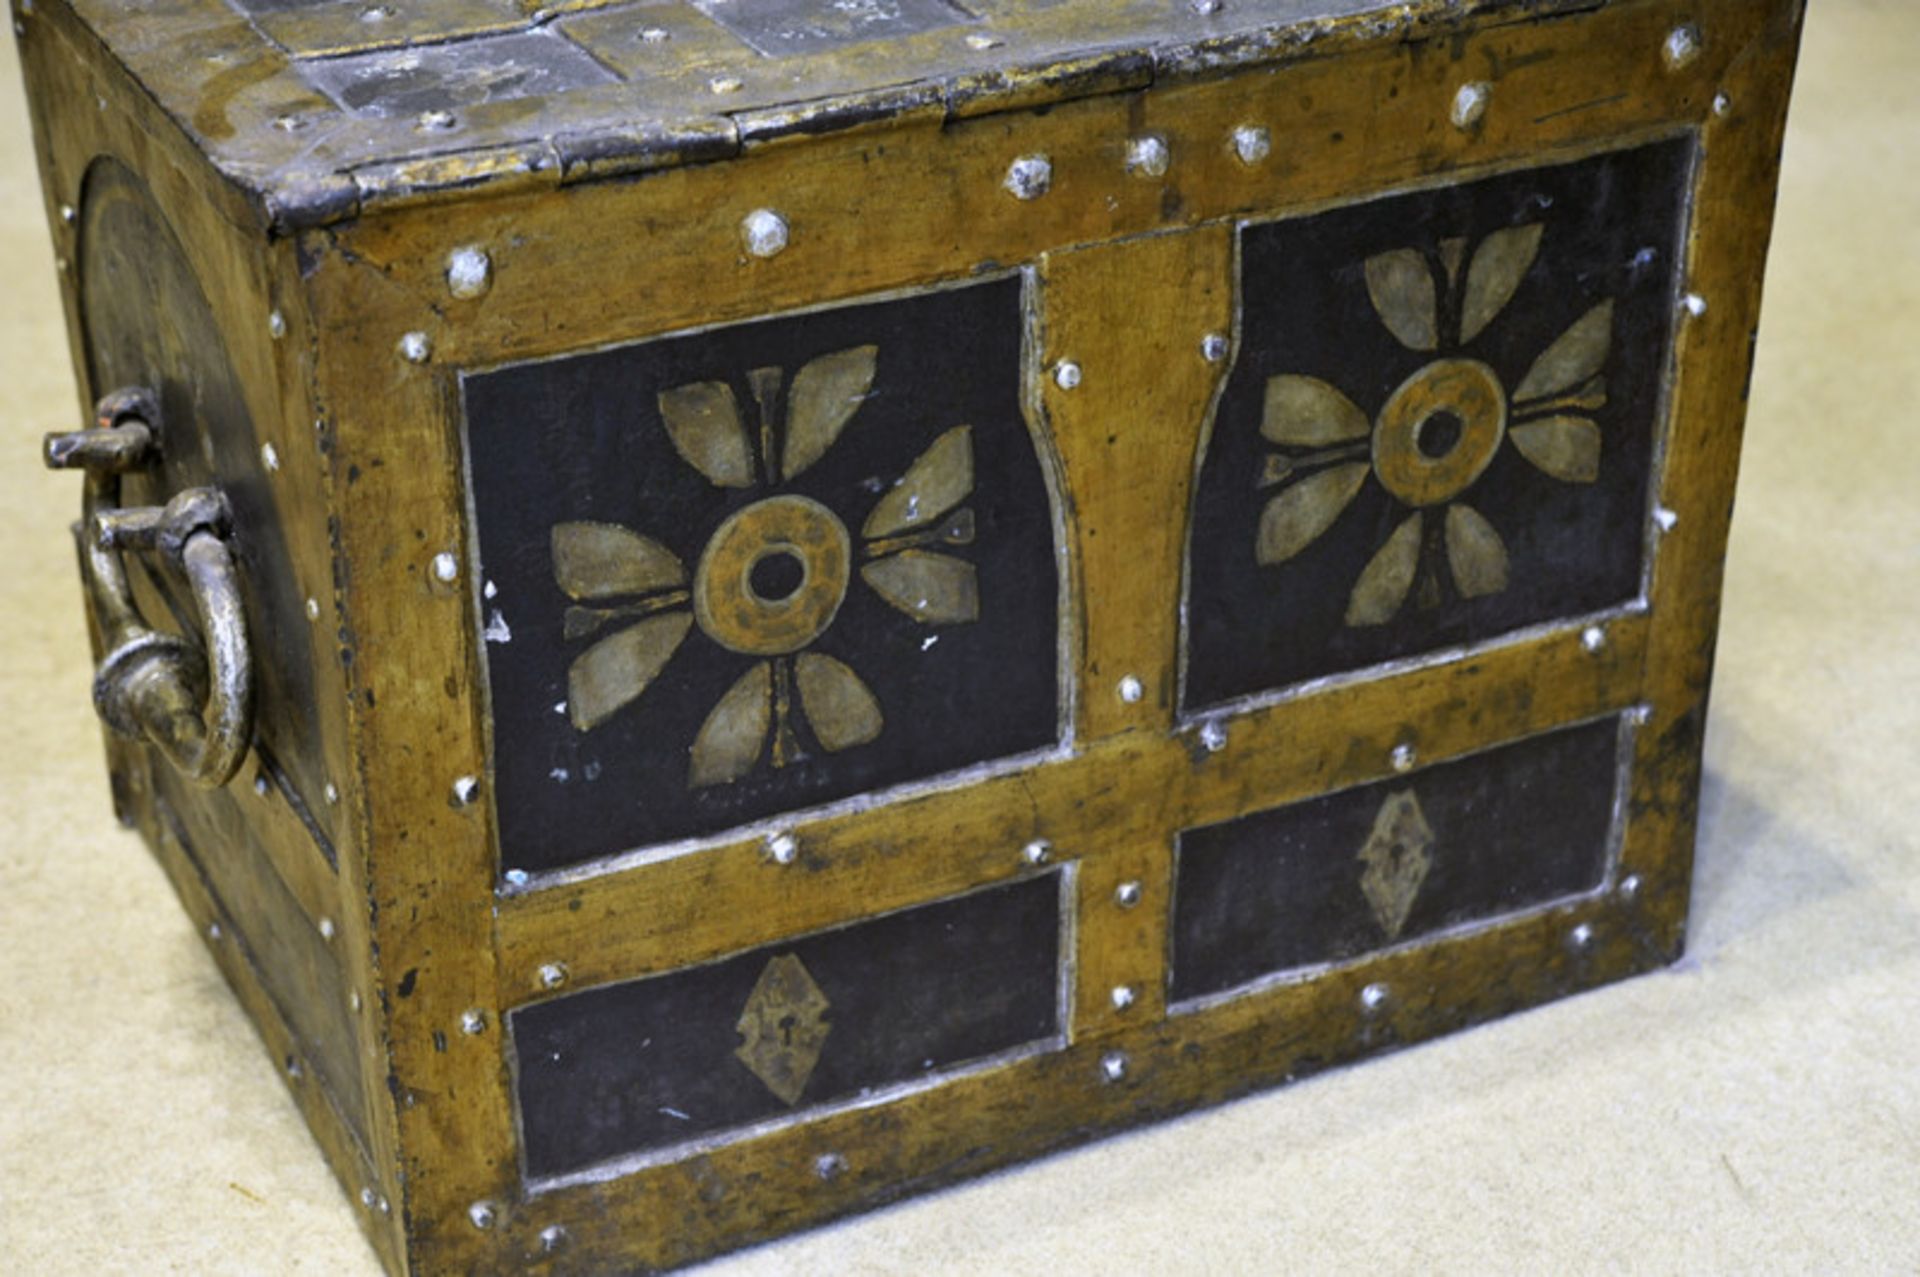 A travelling iron strong-box, dating: 18th Century, provenance: Europe, dating: 18th Century, - Image 9 of 11